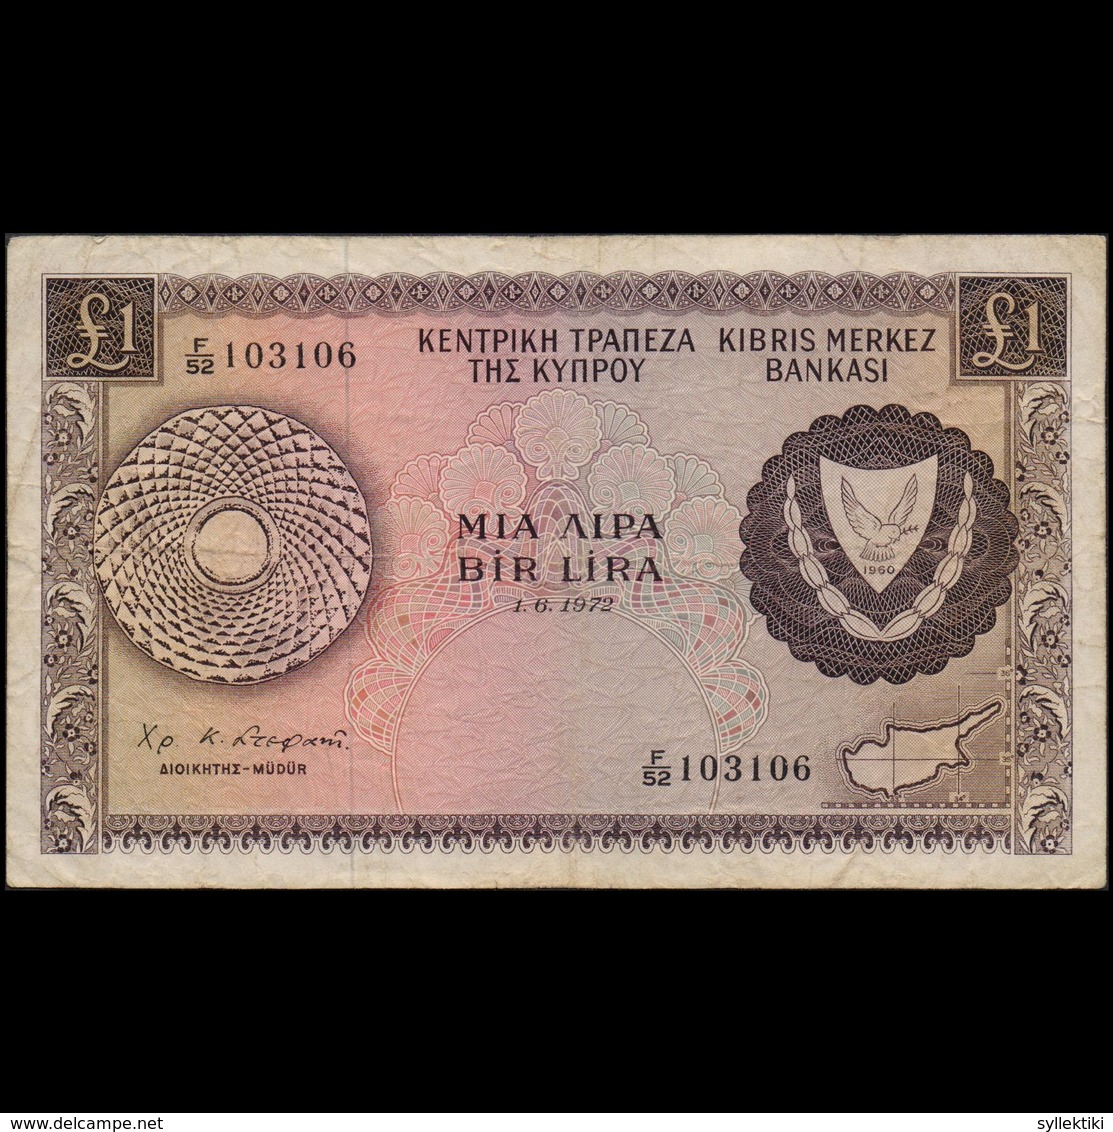 CYPRUS 1.6.1972 ONE POUND BANKNOTE VF - Cyprus